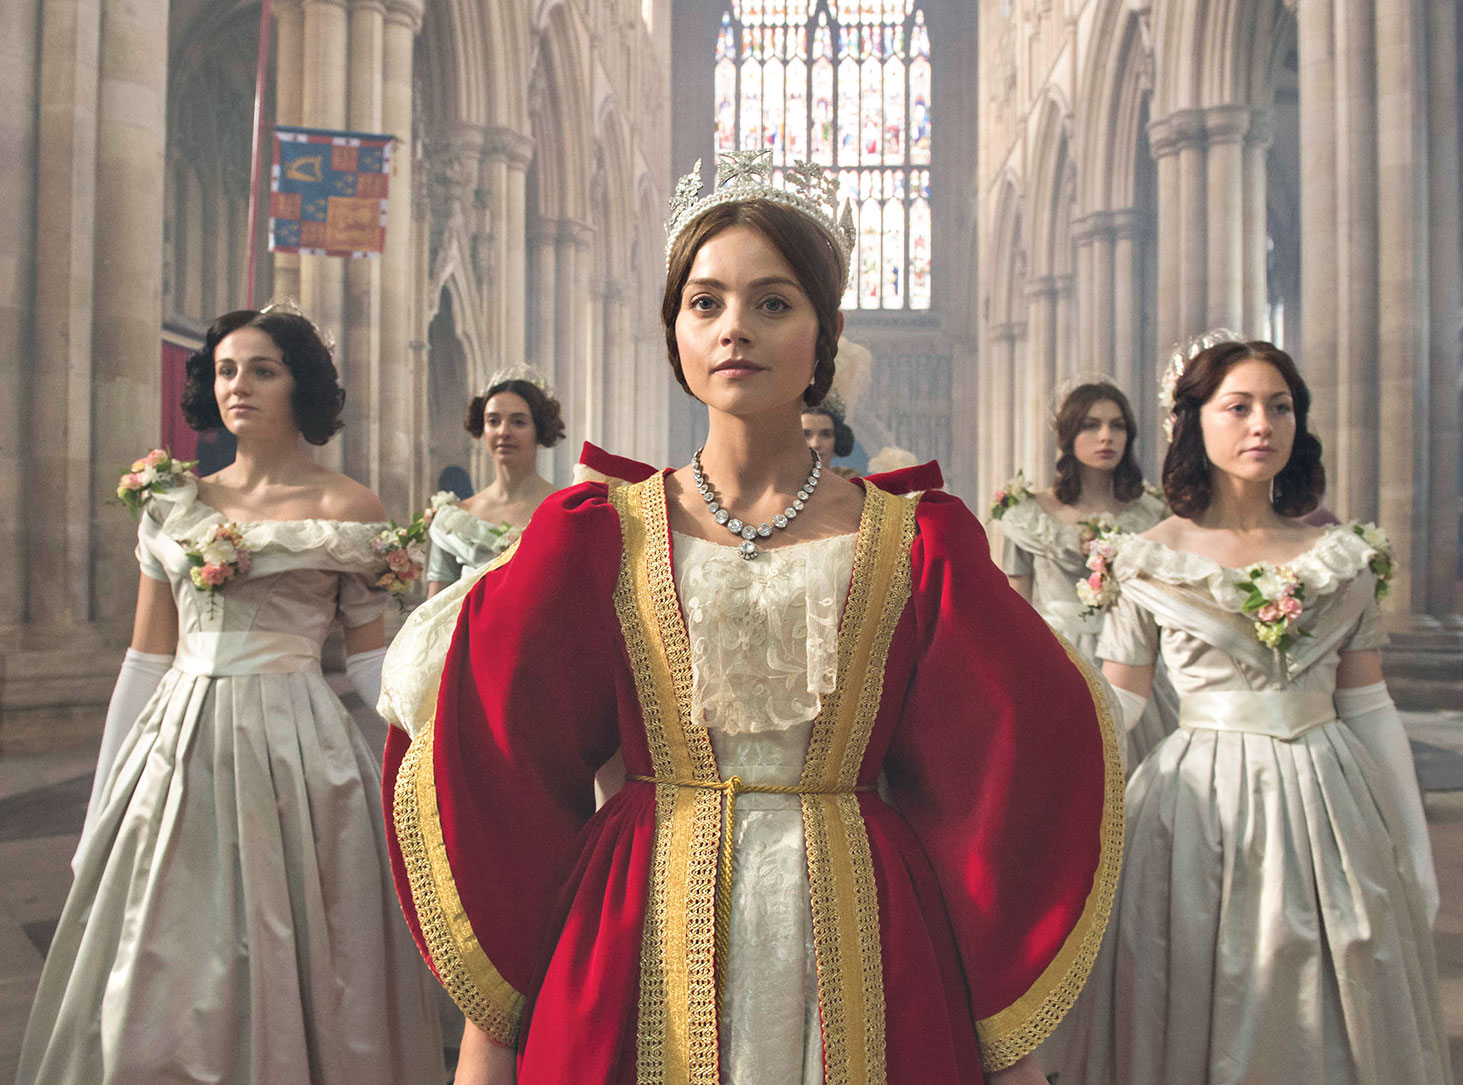 MASTERPIECE VICTORIA Shown: JENNA COLEMAN as Victoria (C) ITV Plc for MASTERPIECE This image may be used only in the direct promotion of MASTERPIECE CLASSIC. No other rights are granted. All rights are reserved. Editorial use only. USE ON THIRD PARTY SITES SUCH AS FACEBOOK AND TWITTER IS NOT ALLOWED.